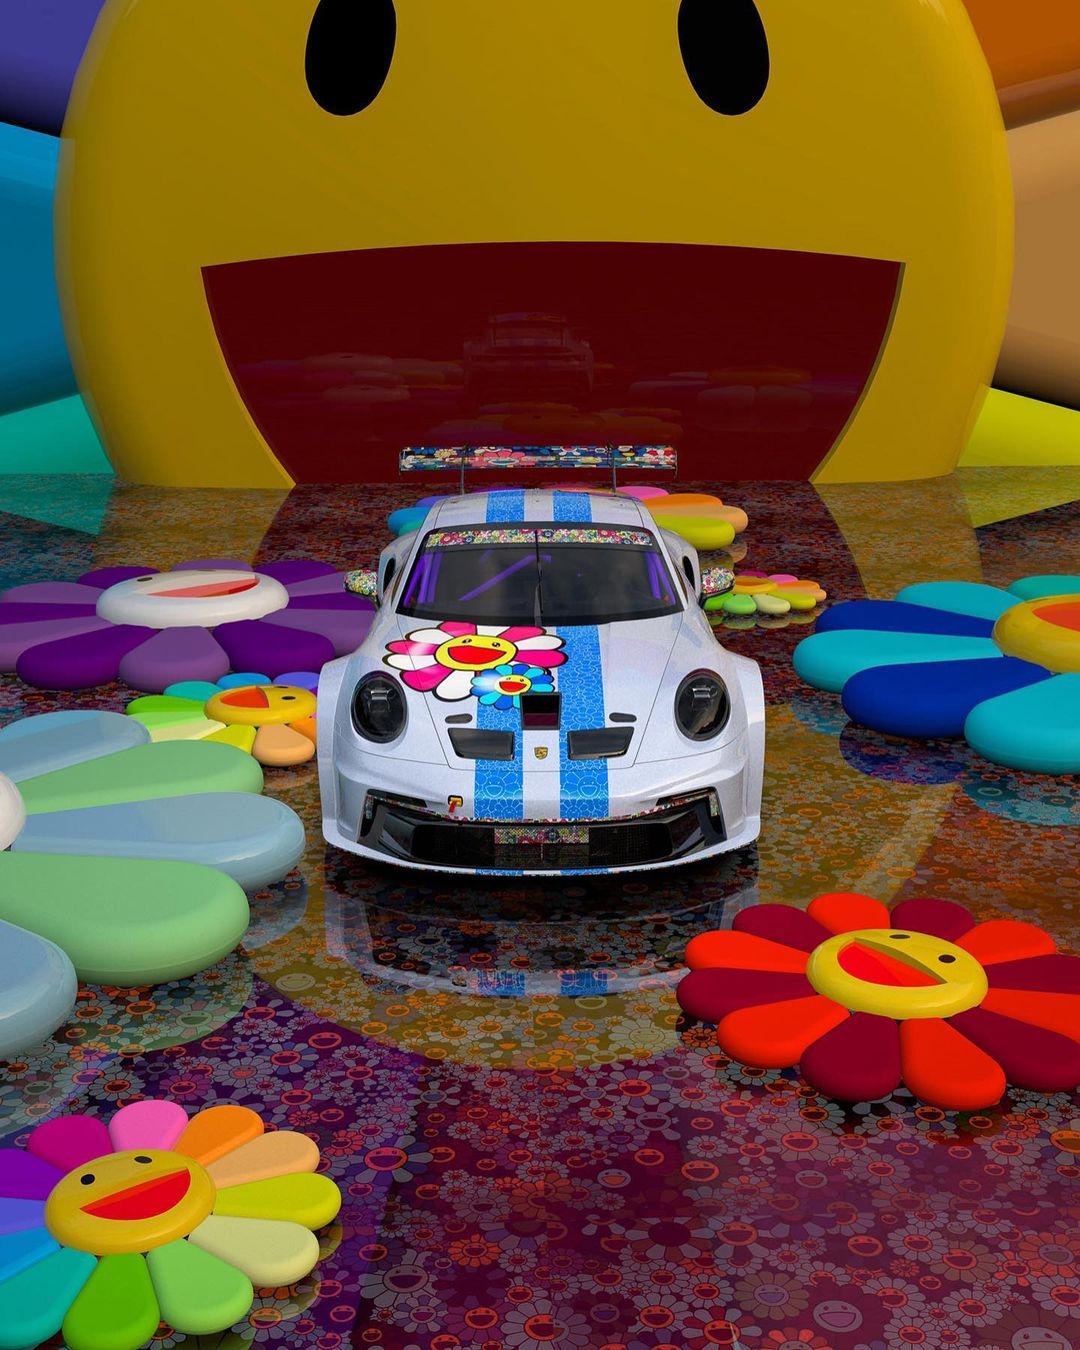 Porsche 911 GT3 Cup, surrounded by surreal smiling flowers